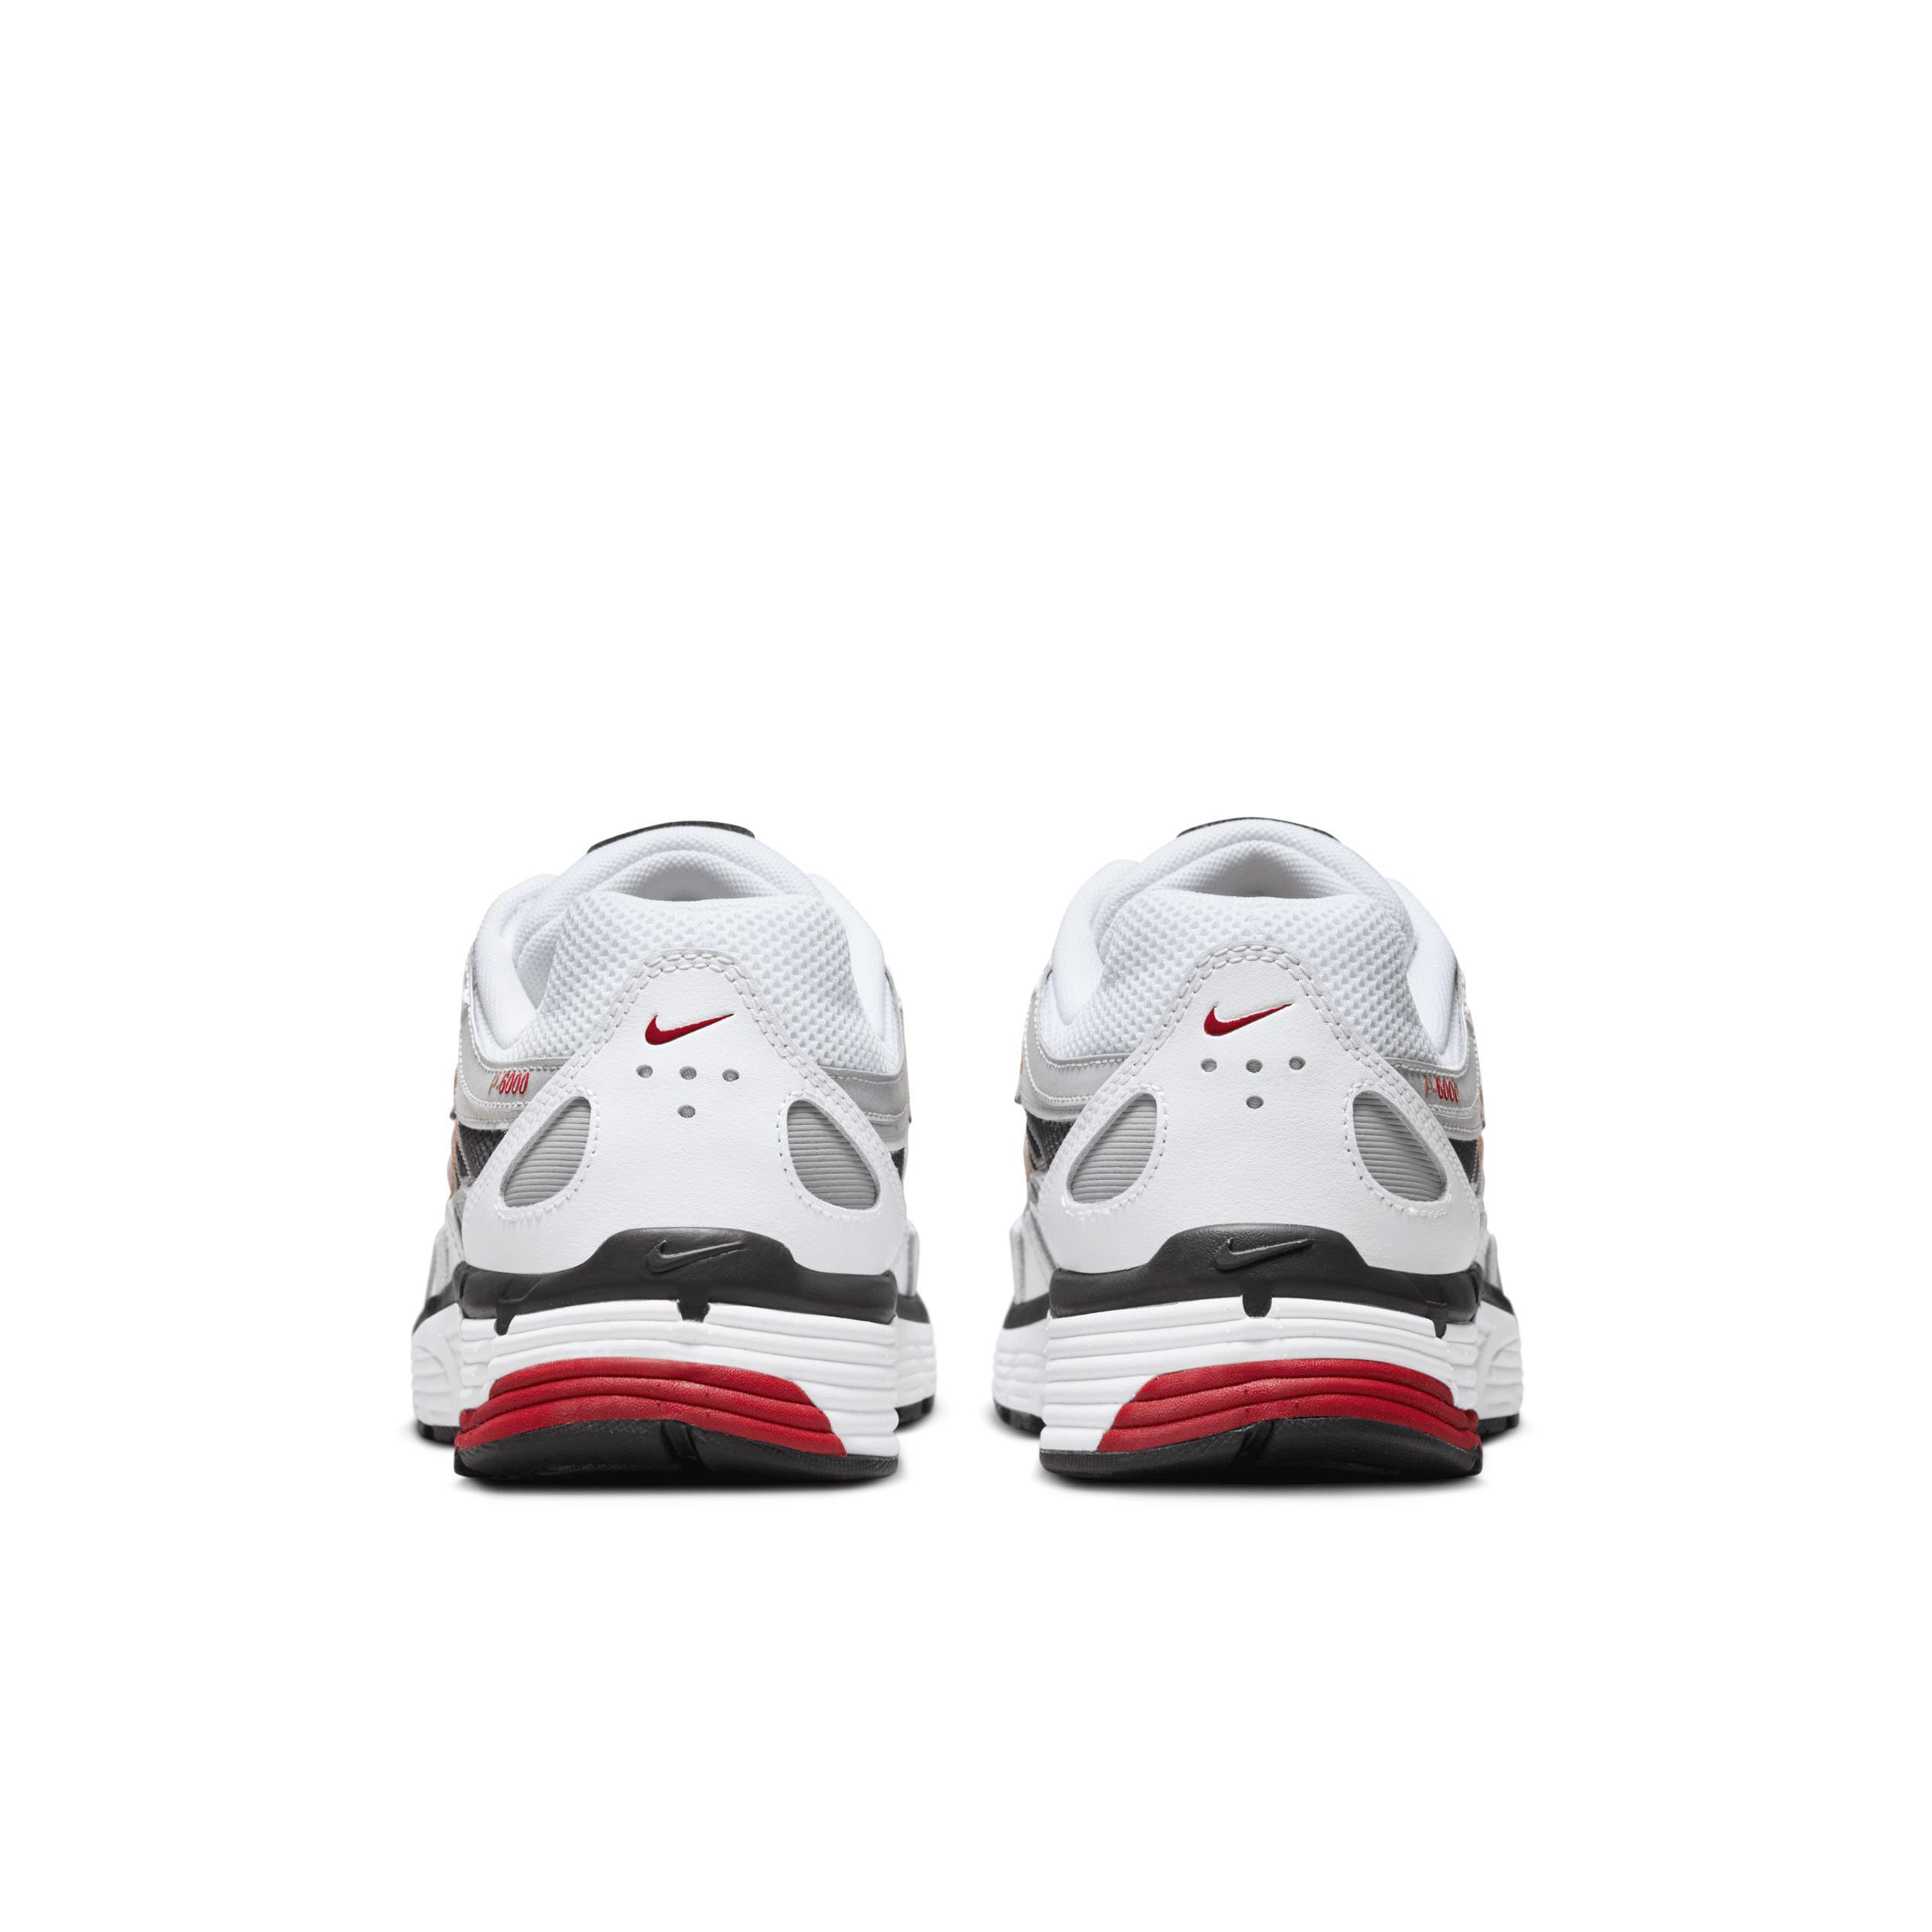 Nike P-6000 sneakers Product Image